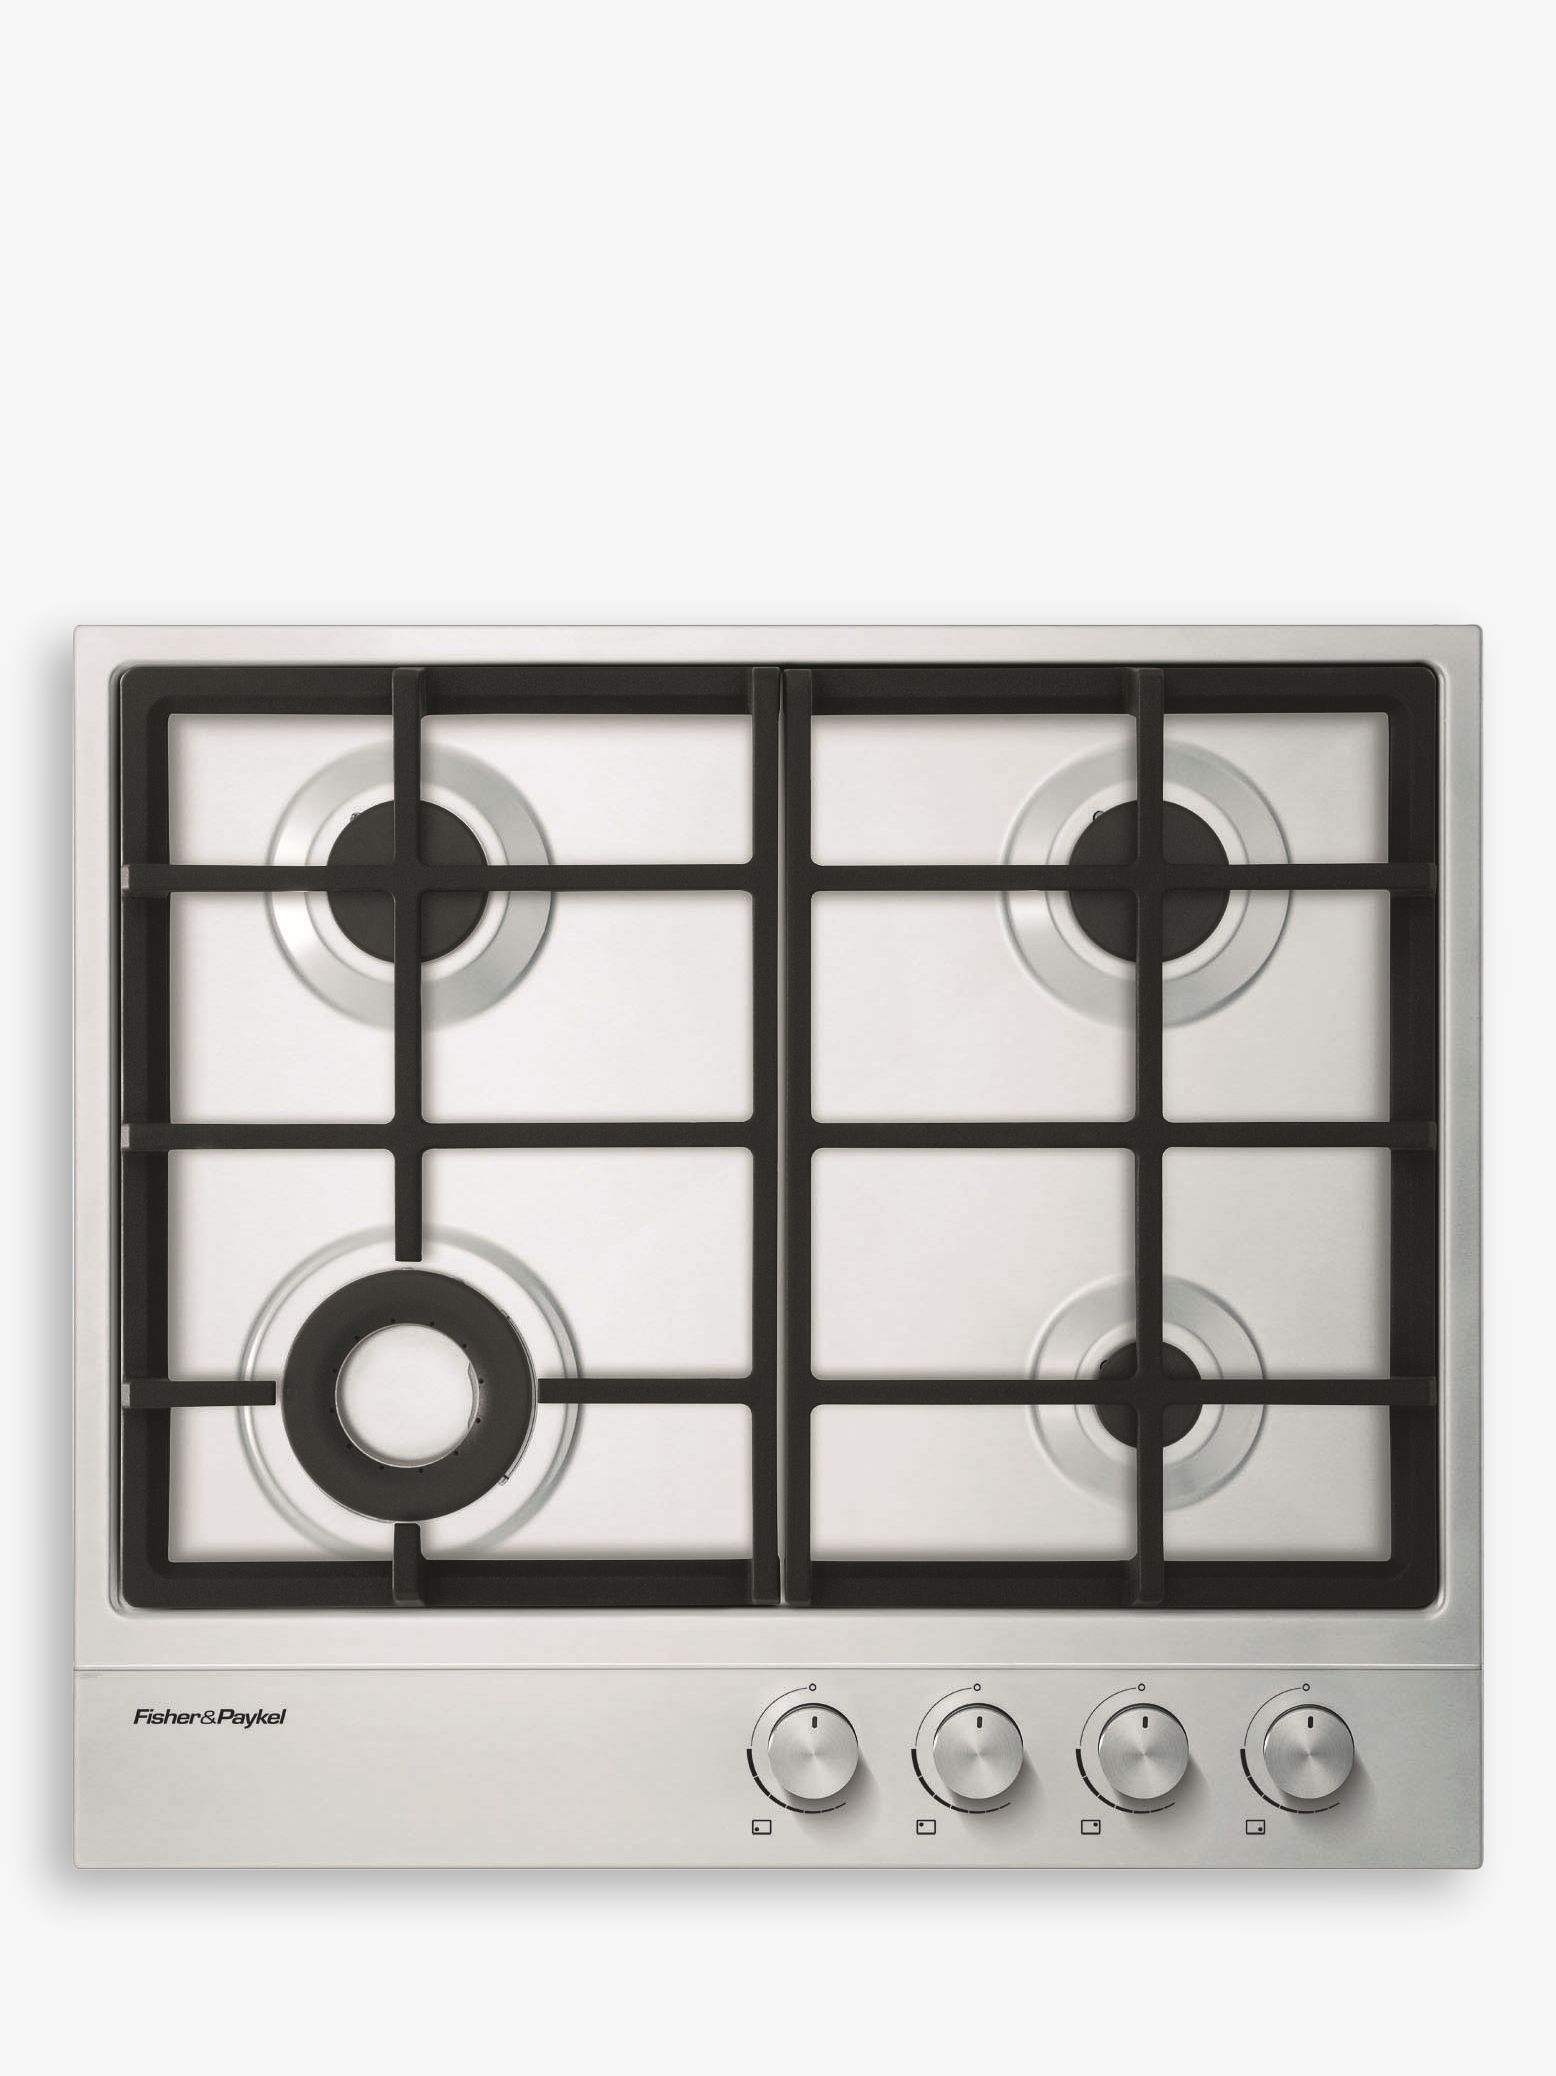 Fisher & Paykel CG604DNGX1 Gas Hob, Stainless Steel Review thumbnail